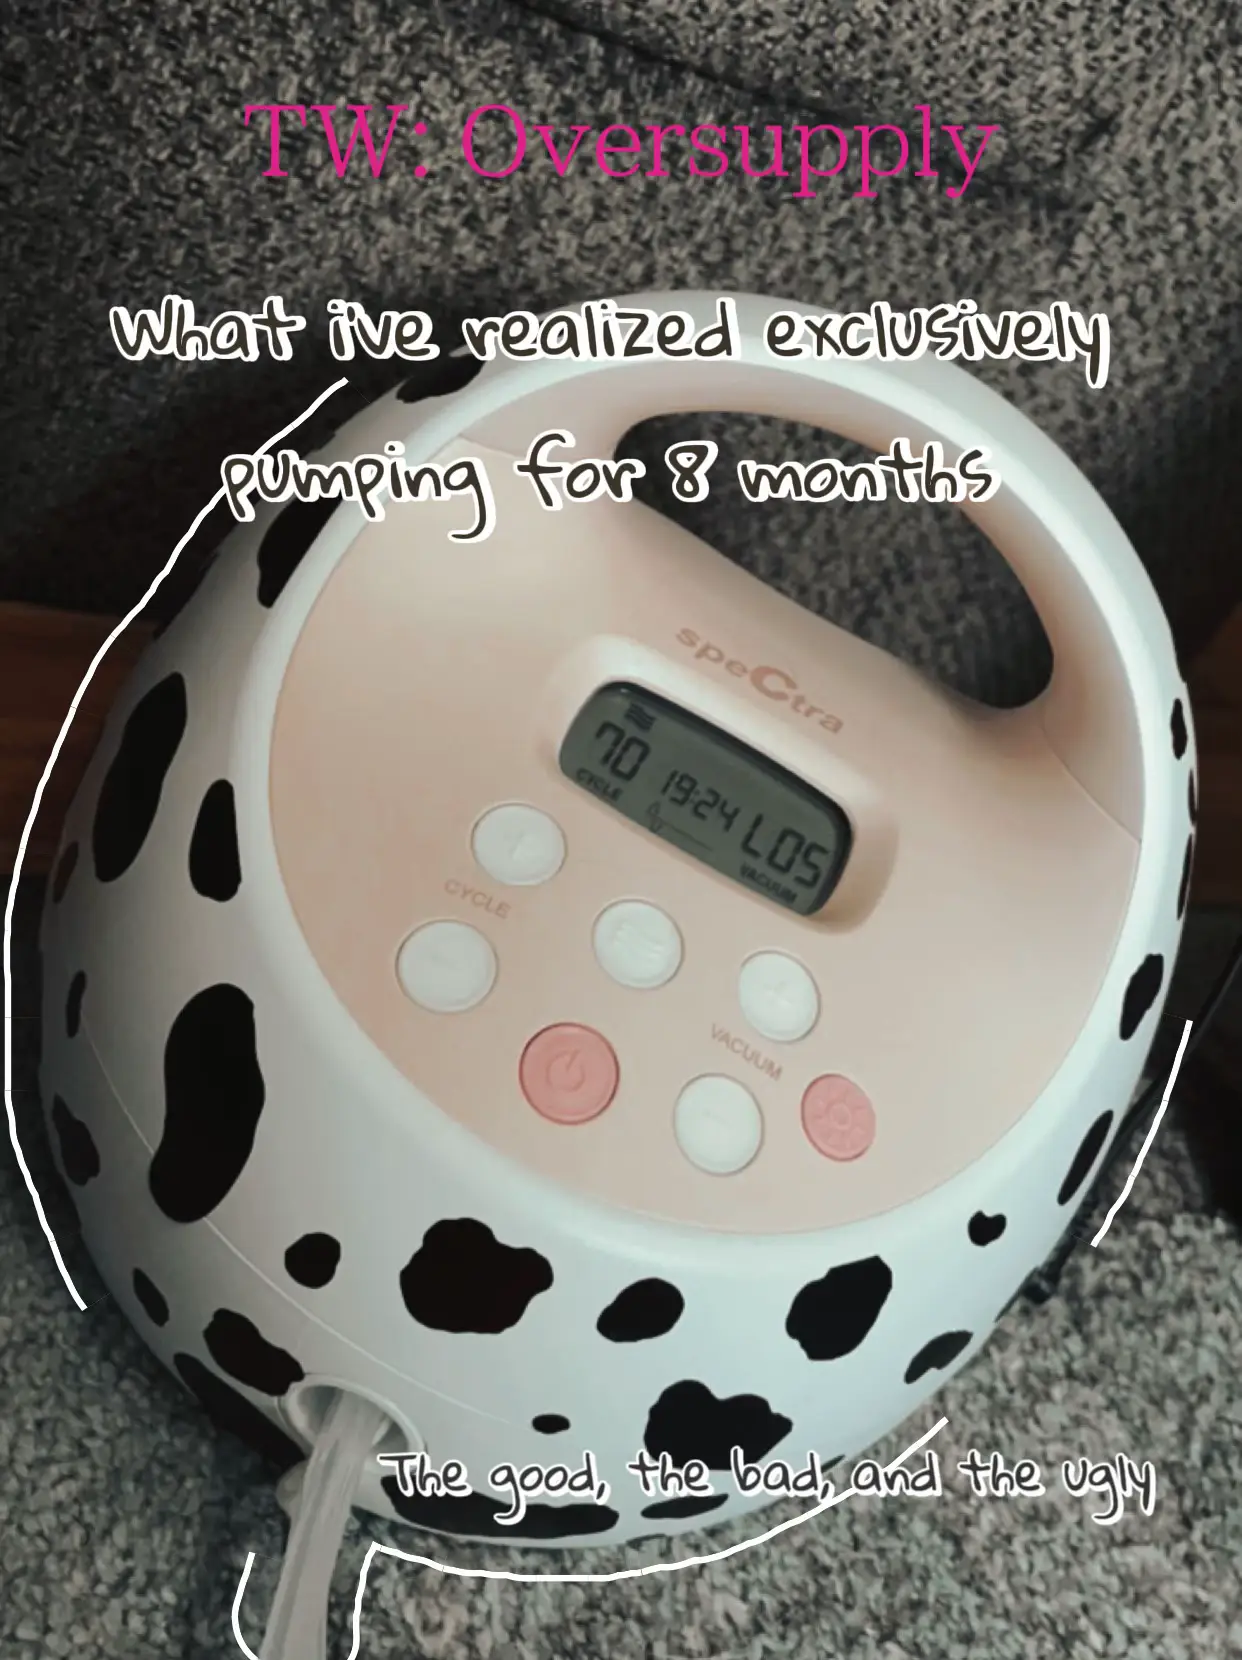 How to use Spectra breast pump, Spectra S2 plus breast pump settings #baby  #pumping #breastpump 